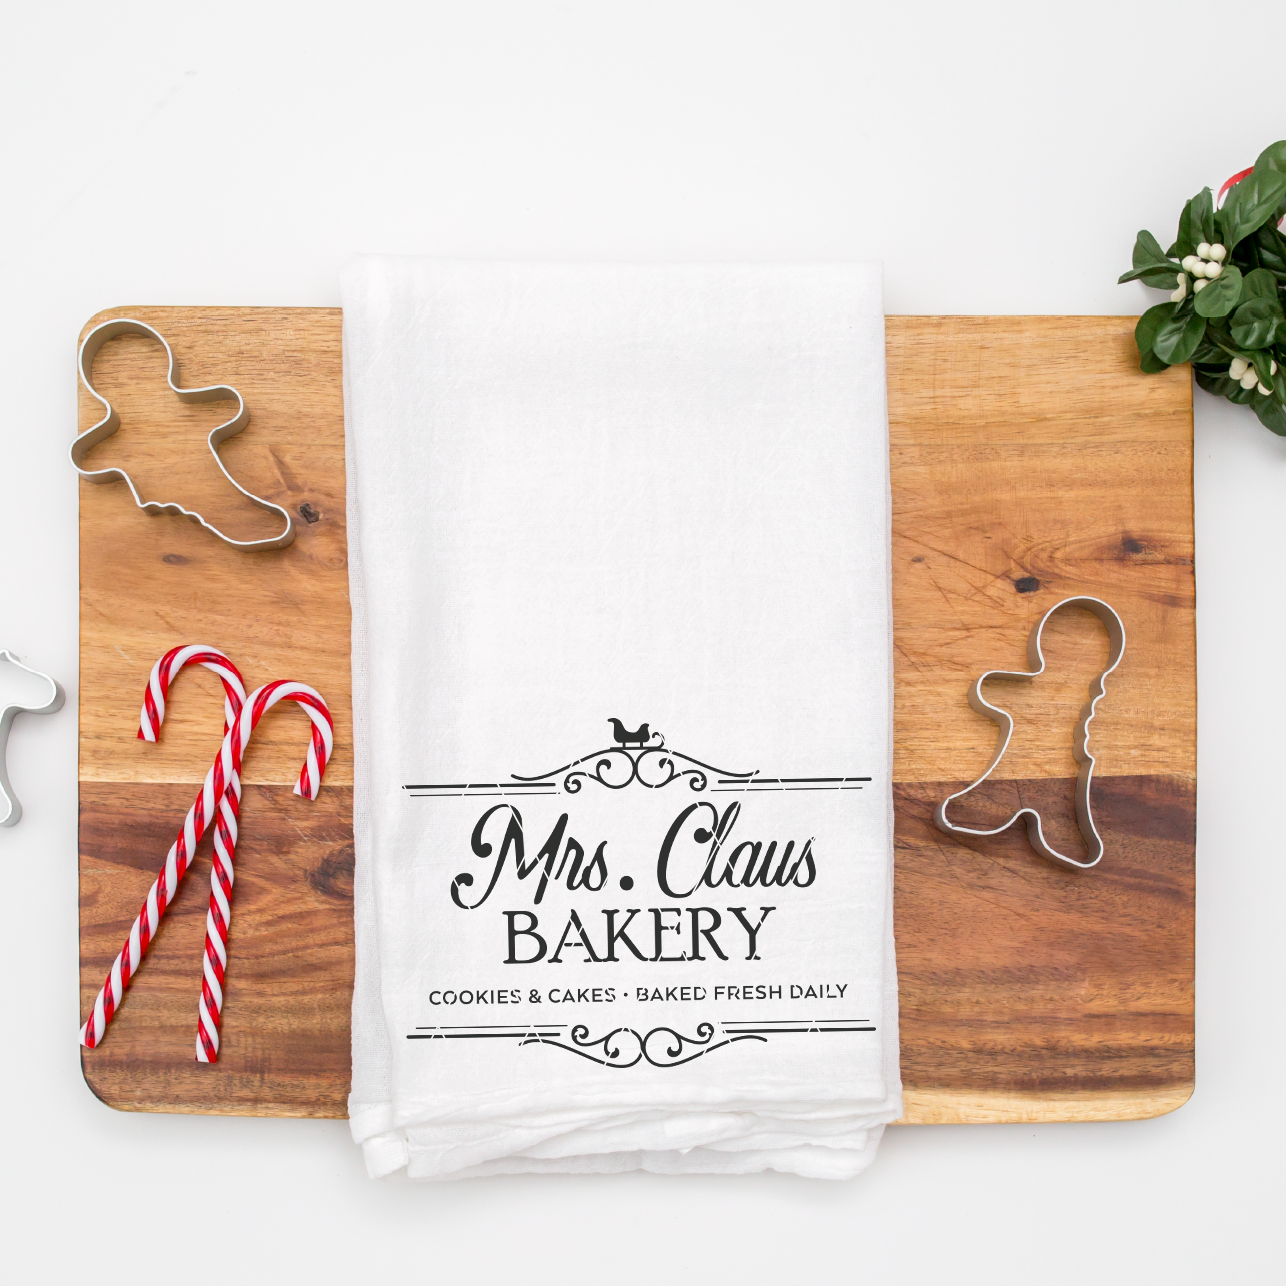 Mrs Claus Bakery Vintage Sign SVG File | Christmas SVG Files | Cricut Designs - Commercial Use SVG Files for Cricut & Silhouette